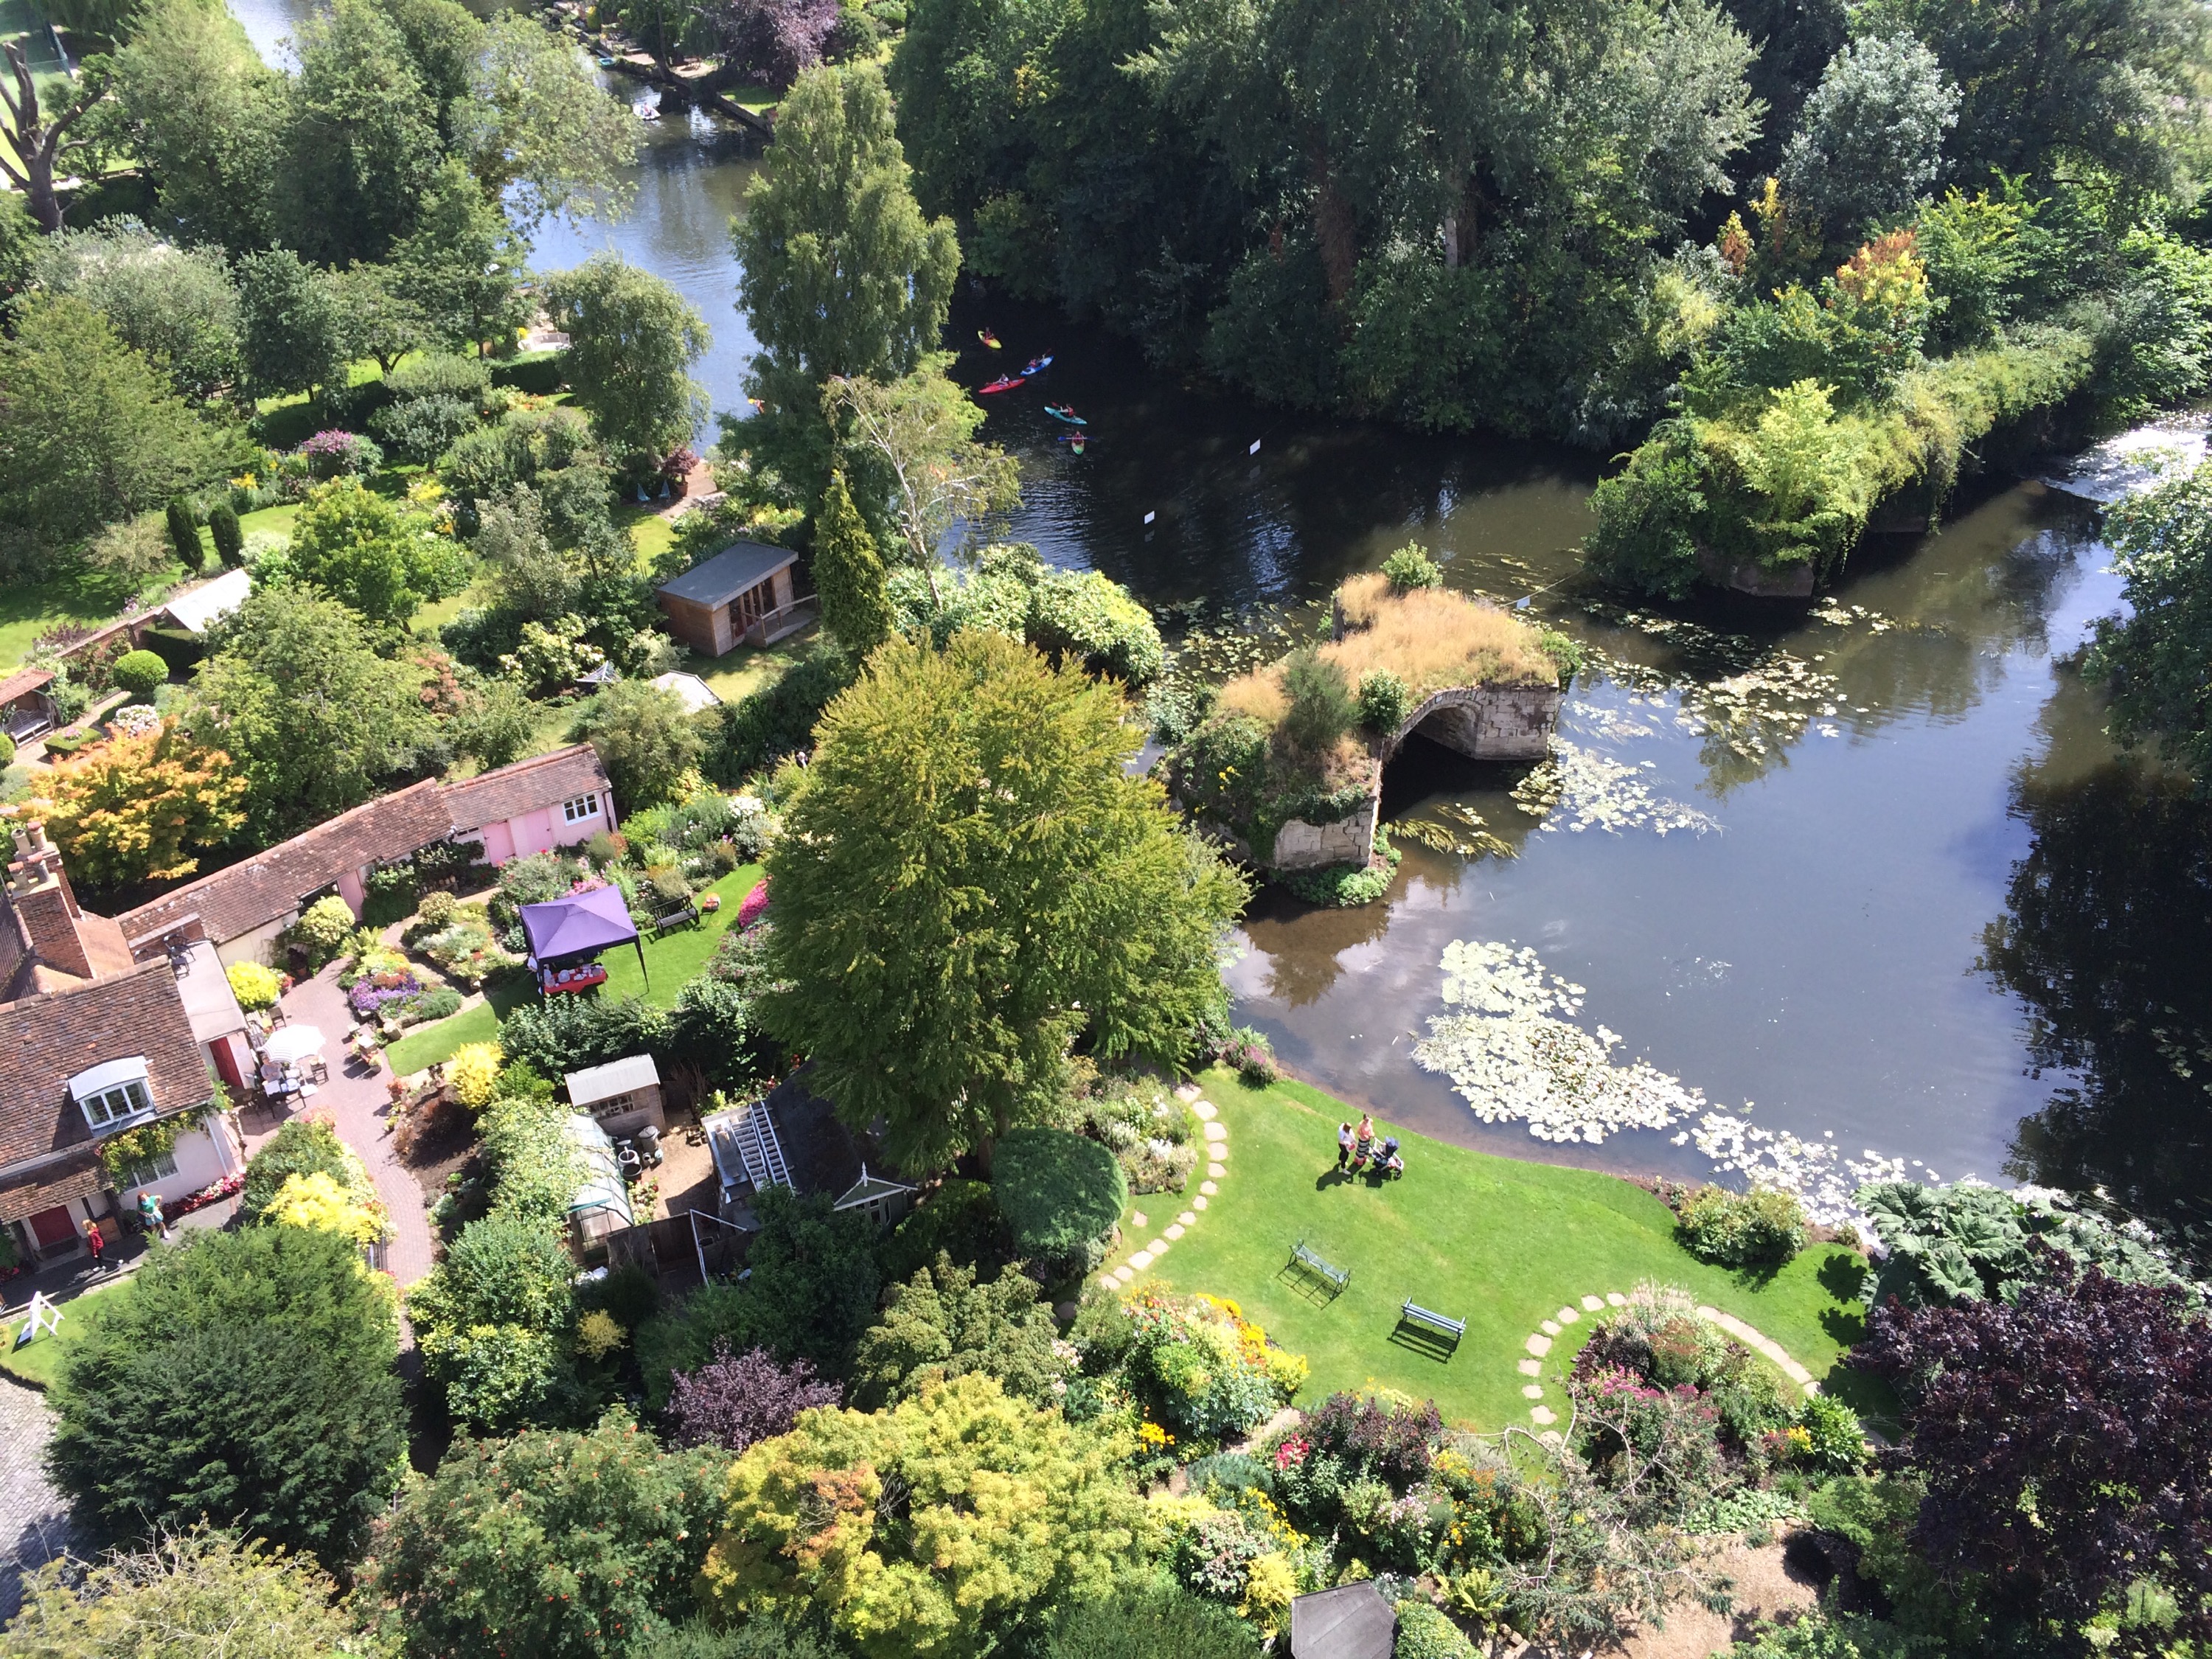 View of a lush garden area from the top of Warwick Castle